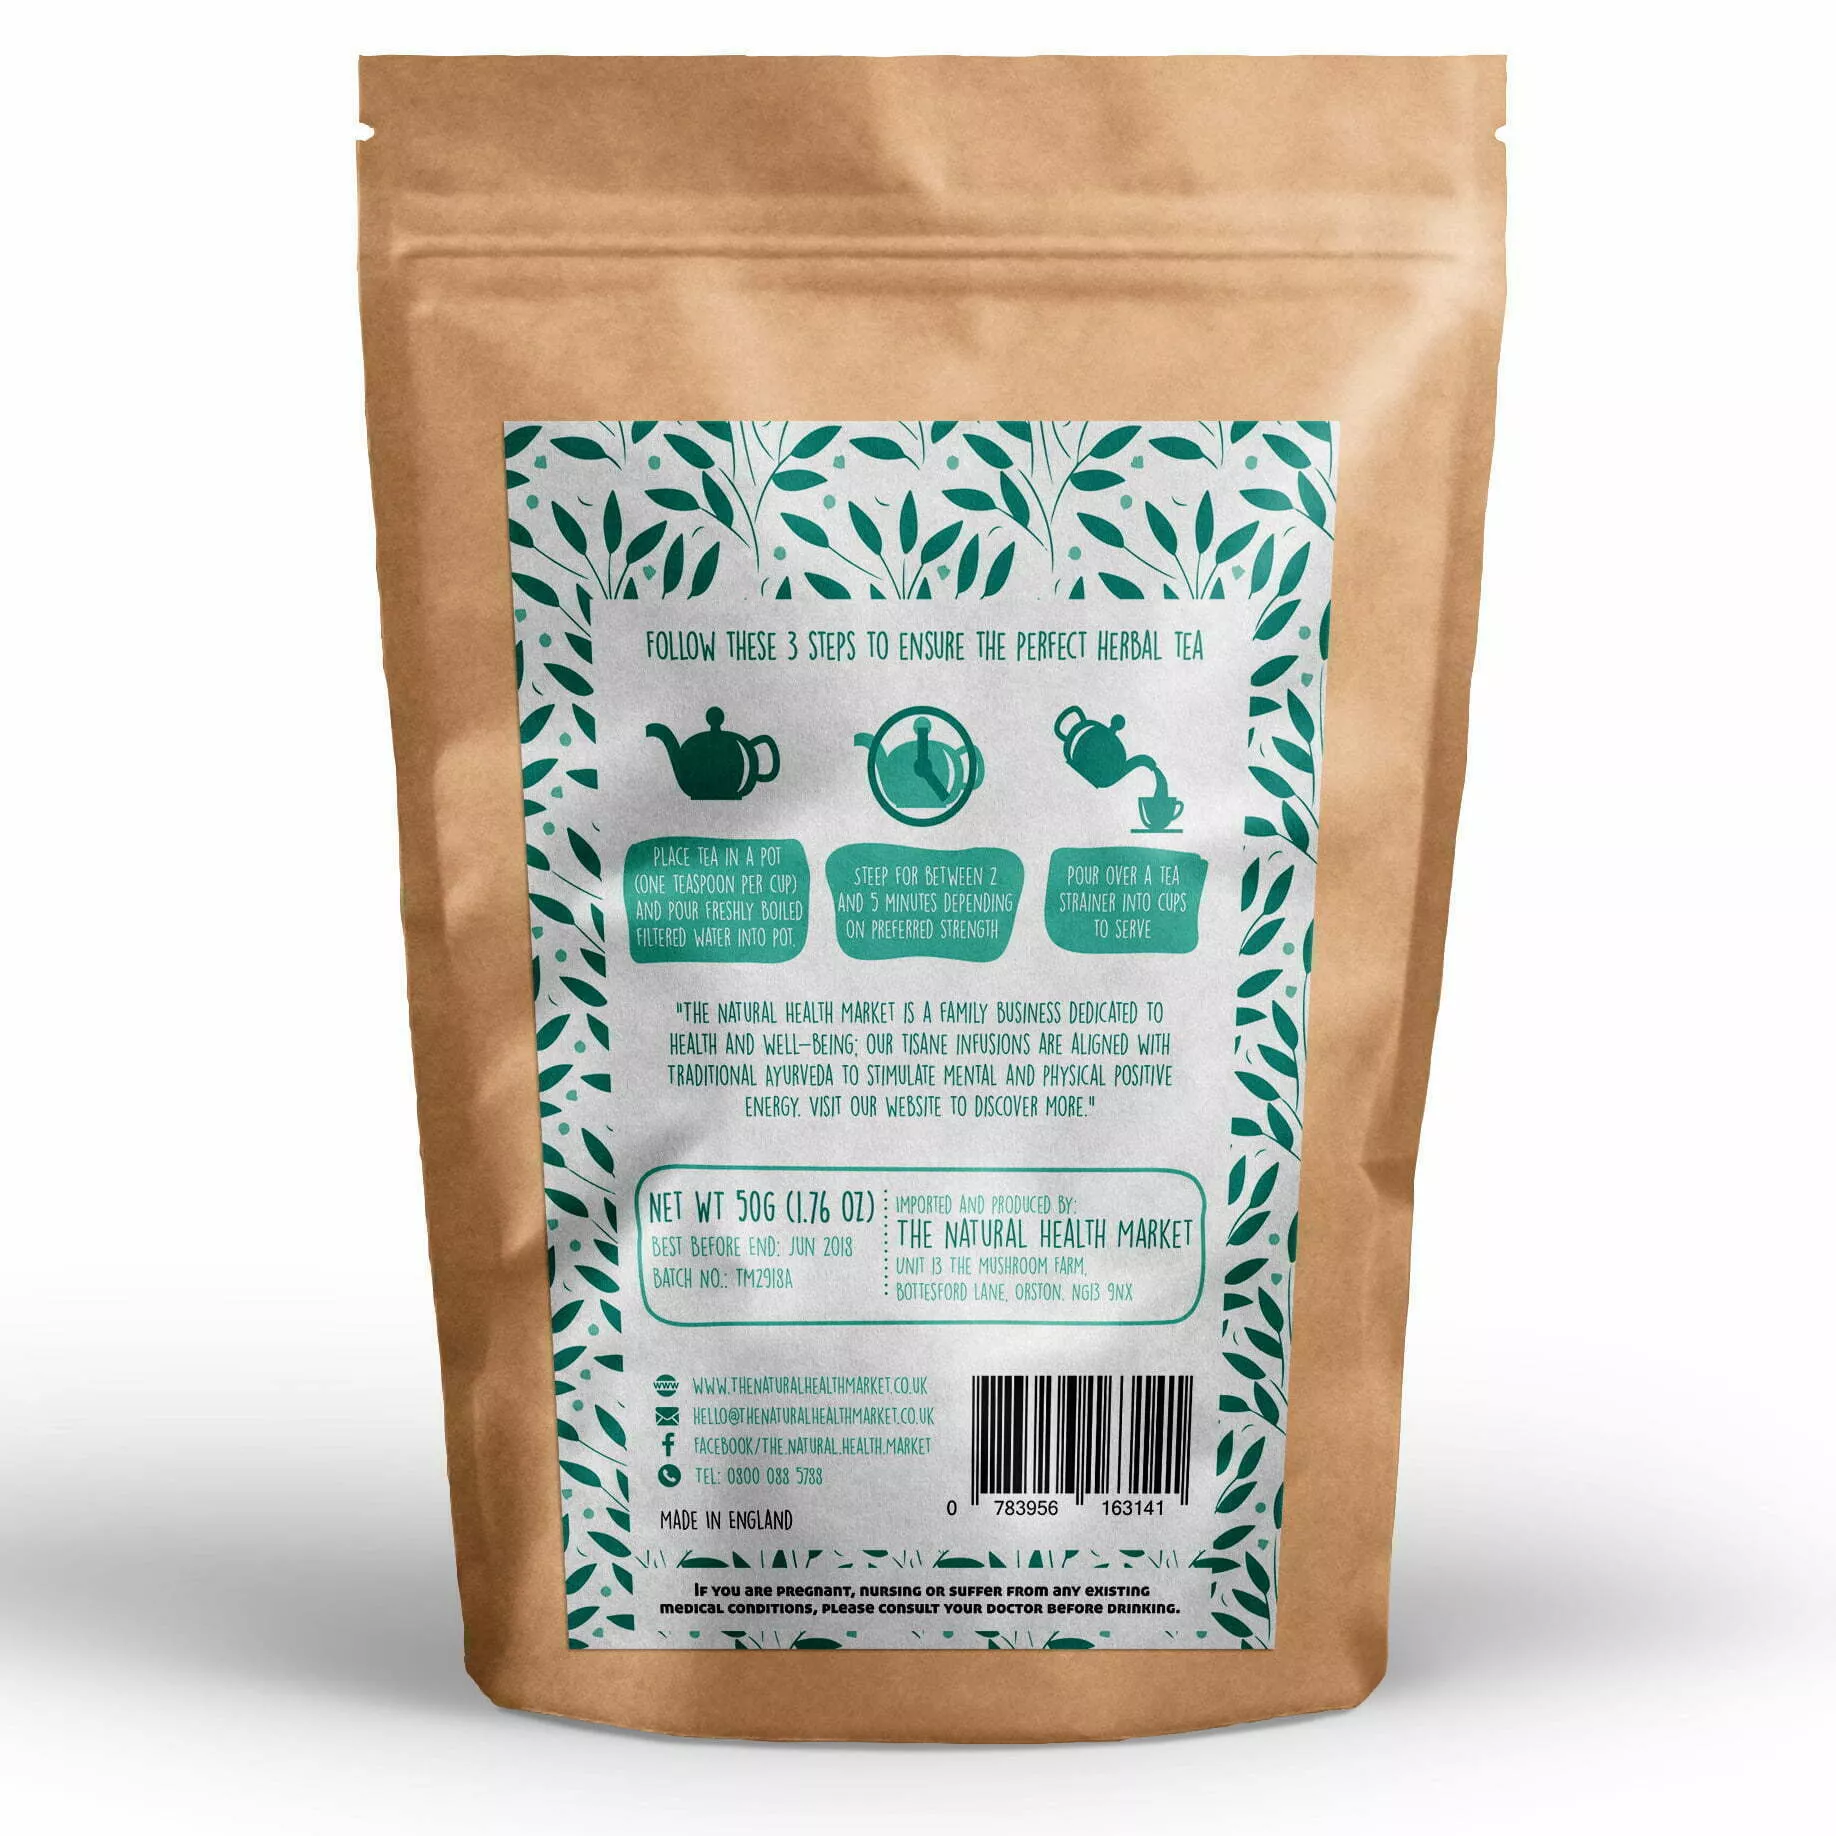 Peppermint tea - Loose Leaf Herbal Tea by The Natural Health Market. 50g pack.